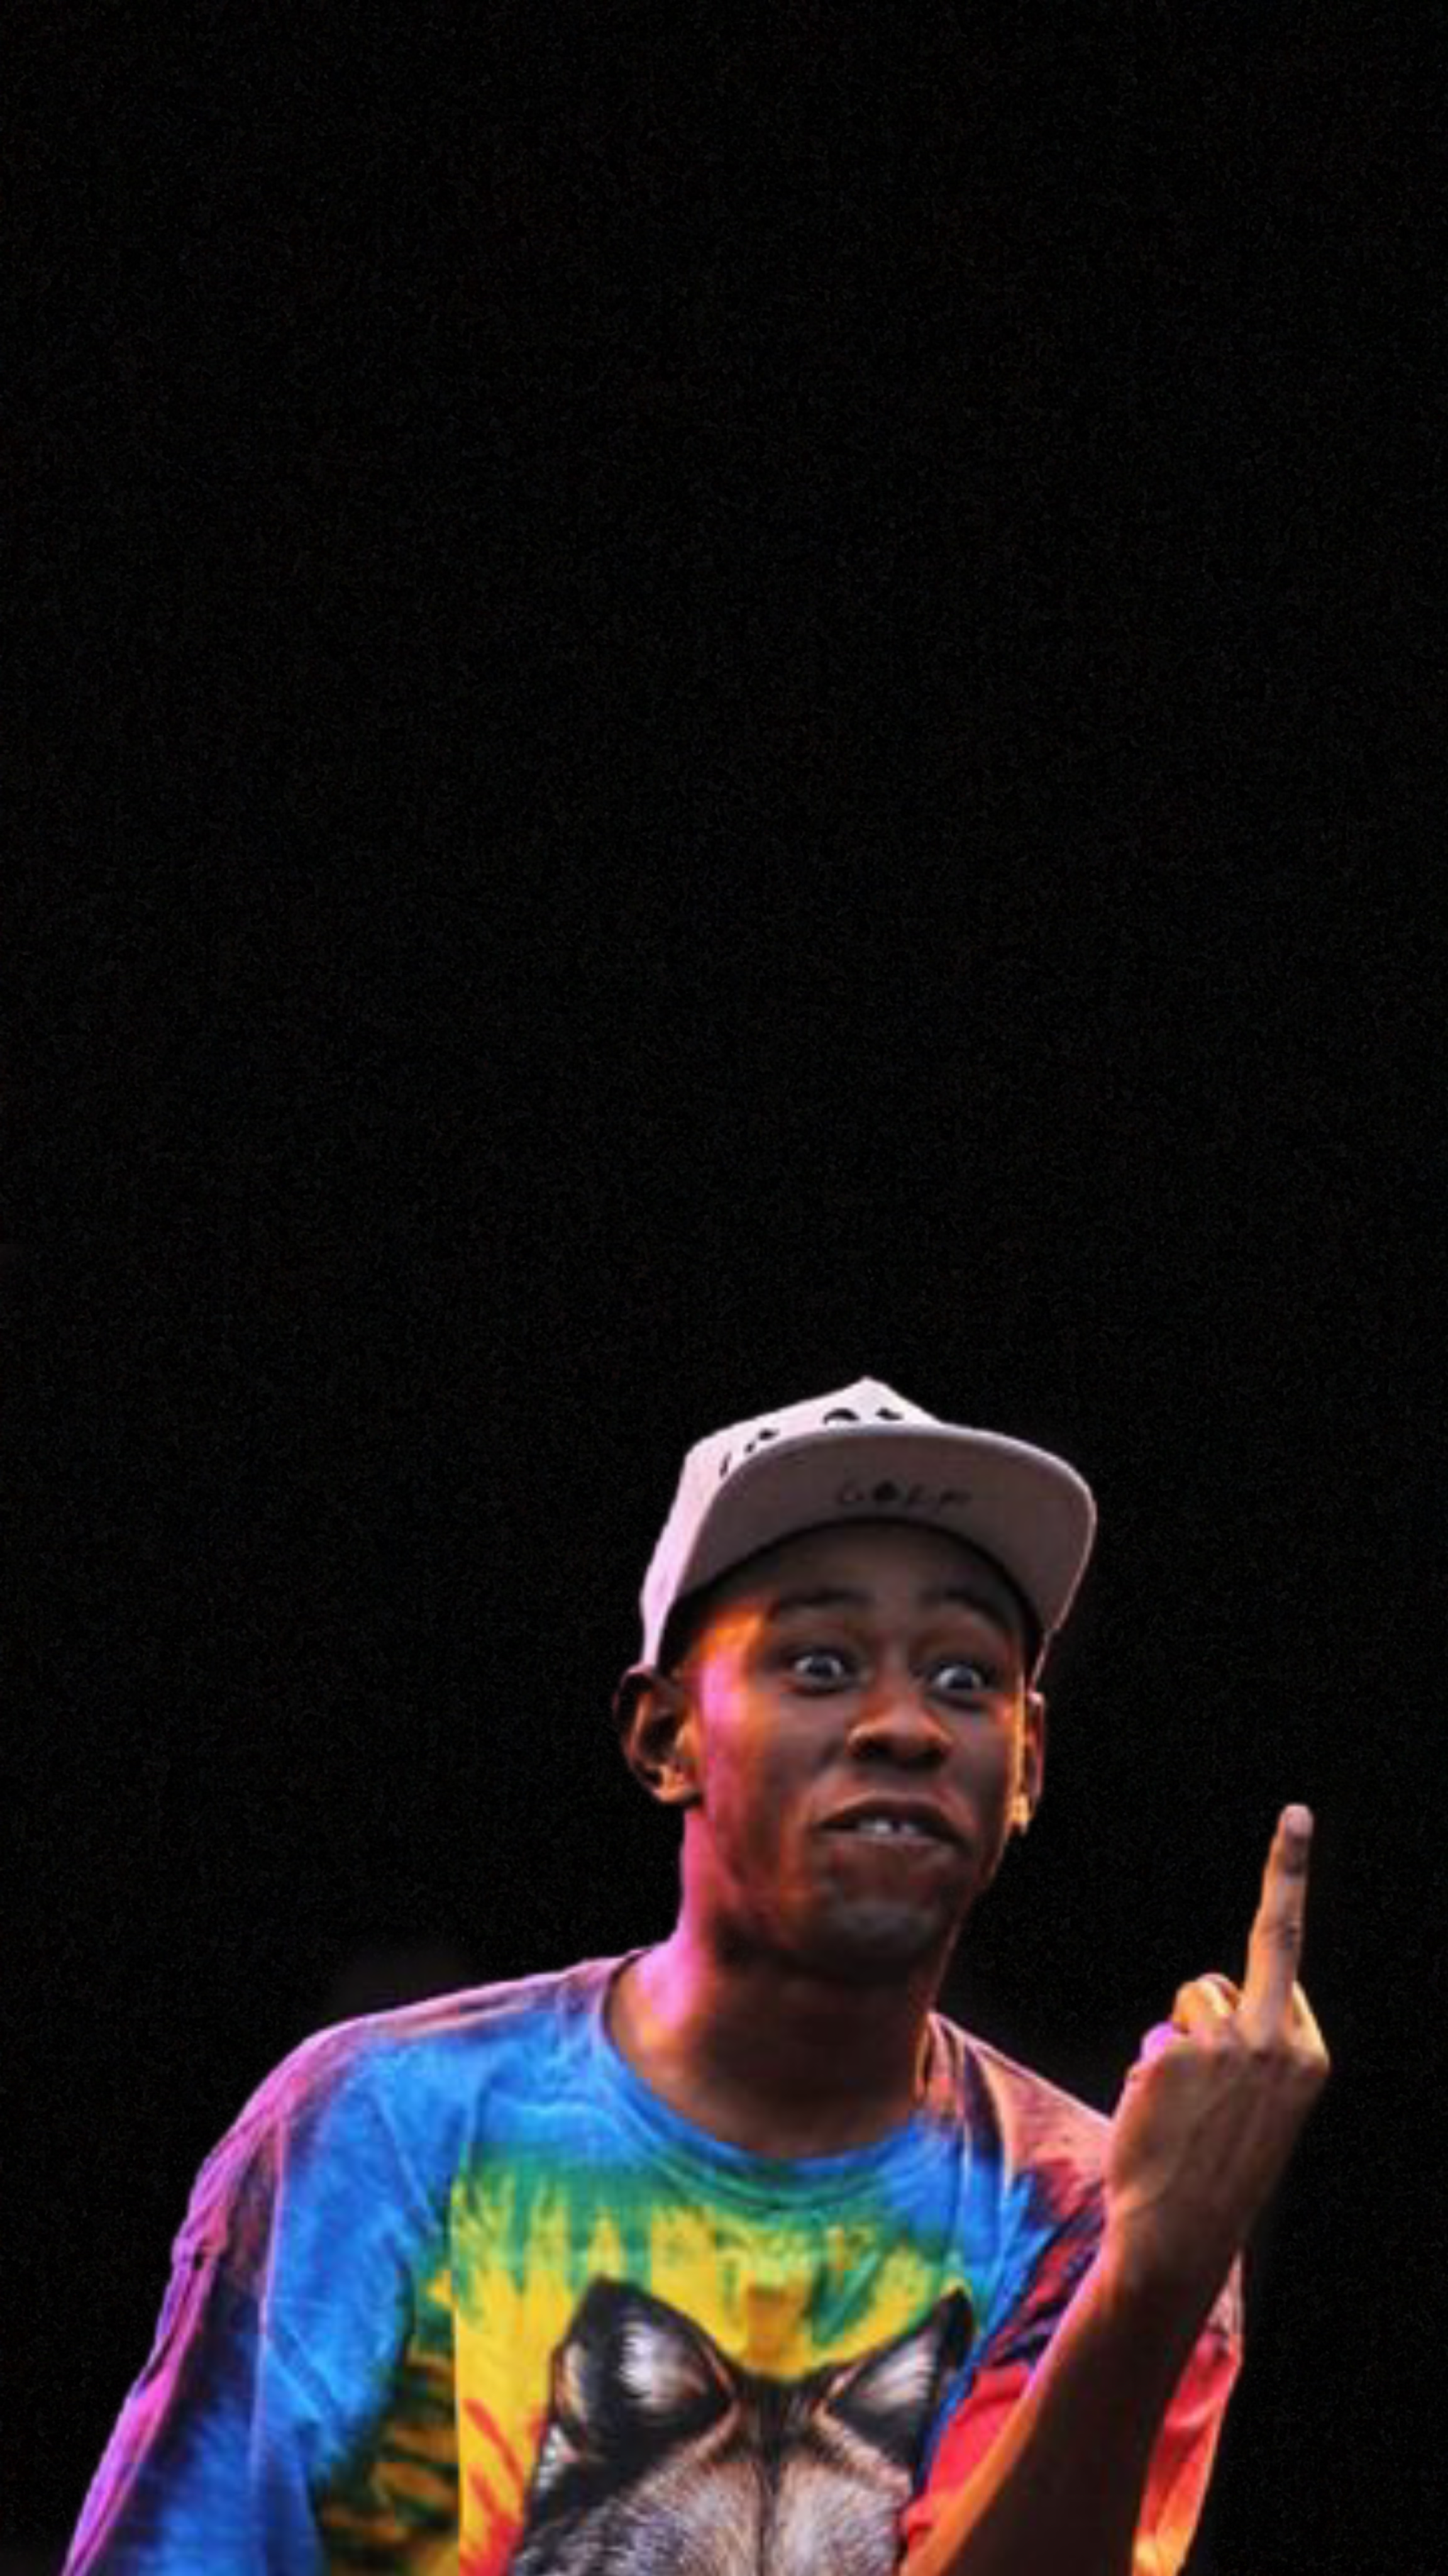 Untitled 02. Tyler the creator wallpaper, Tyler the creator, The creator